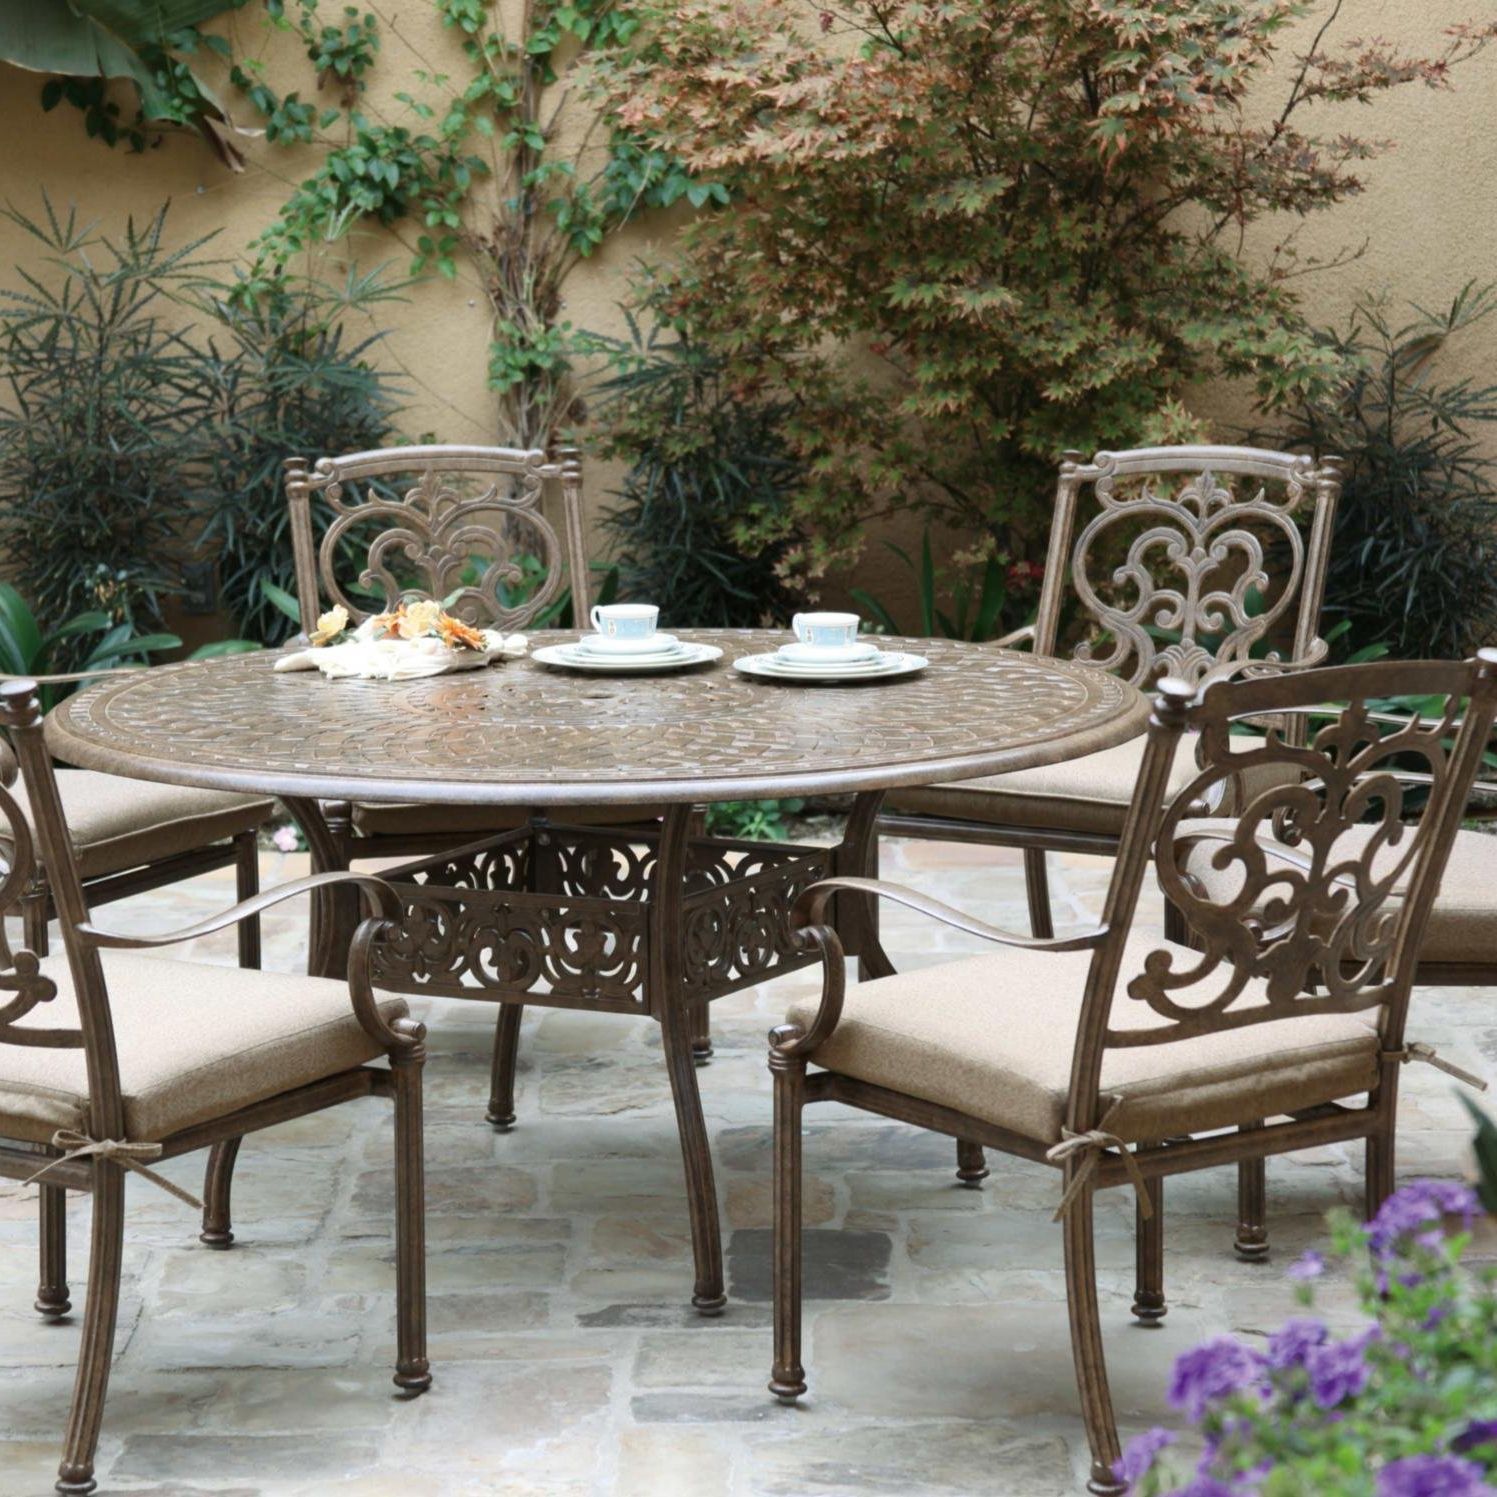 Fashionable Extendable 7 Piece Patio Dining Sets With Regard To Buy Darlee Santa Barbara 7 Piece Cast Aluminum Patio Dining Set With (View 6 of 15)